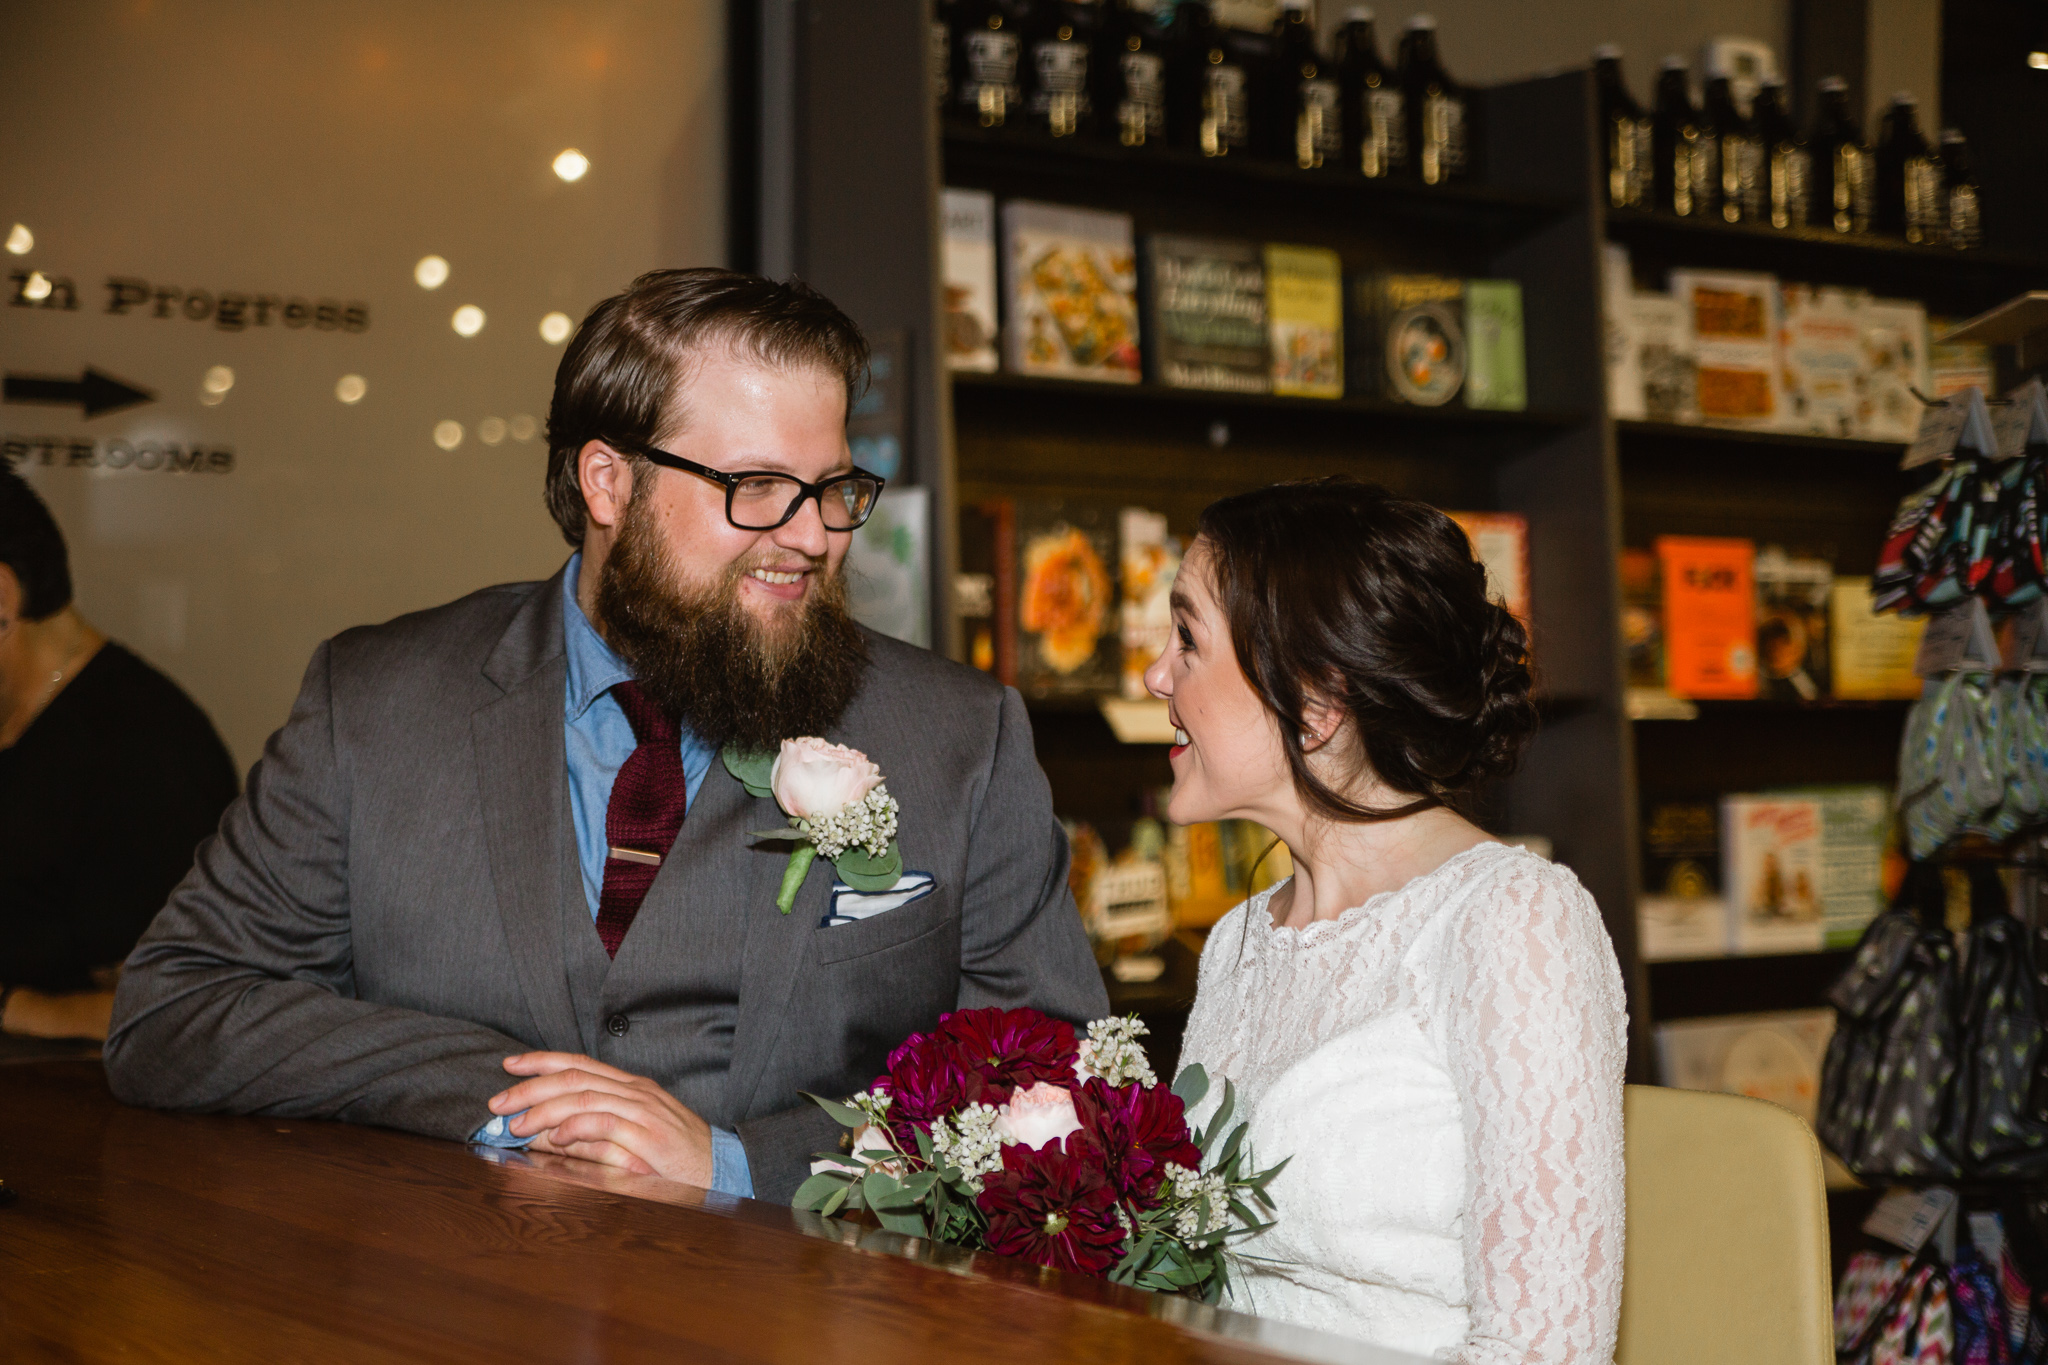 Bride and groom sharing a drink at the First Draft bookstore bar on their wedding day.